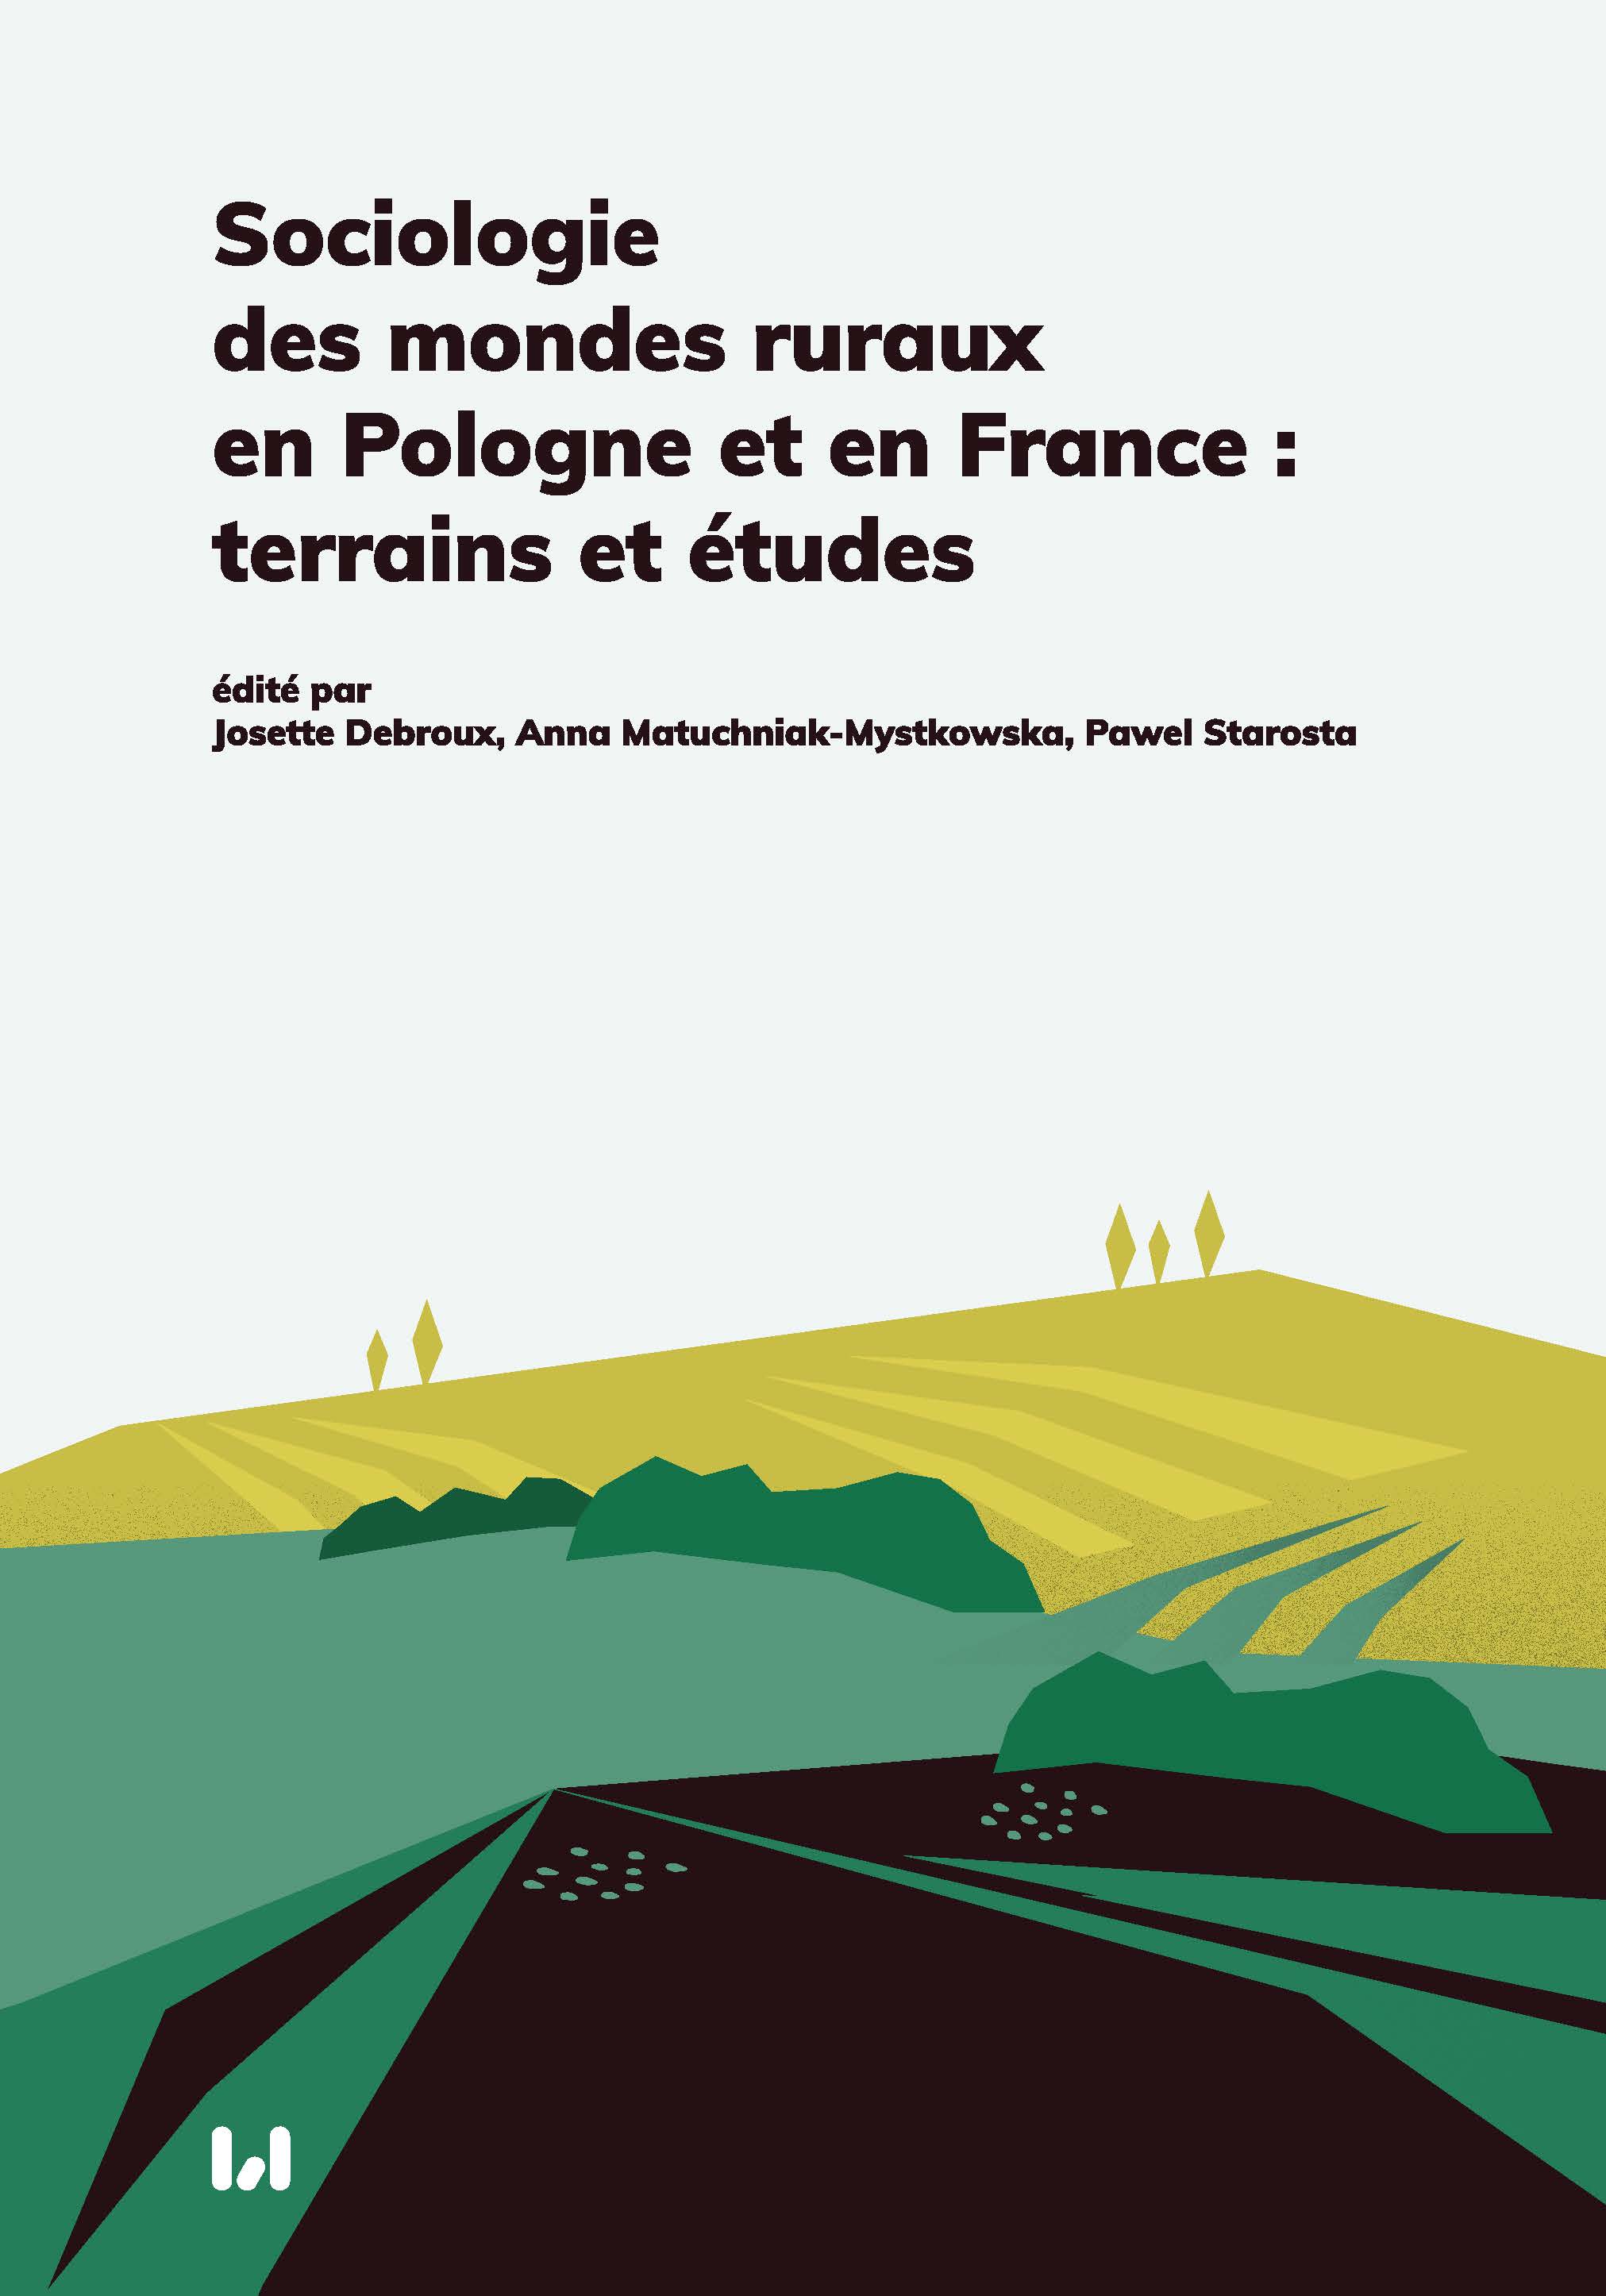 Sociology of rural worlds in Poland and France: fieldwork and studies Cover Image